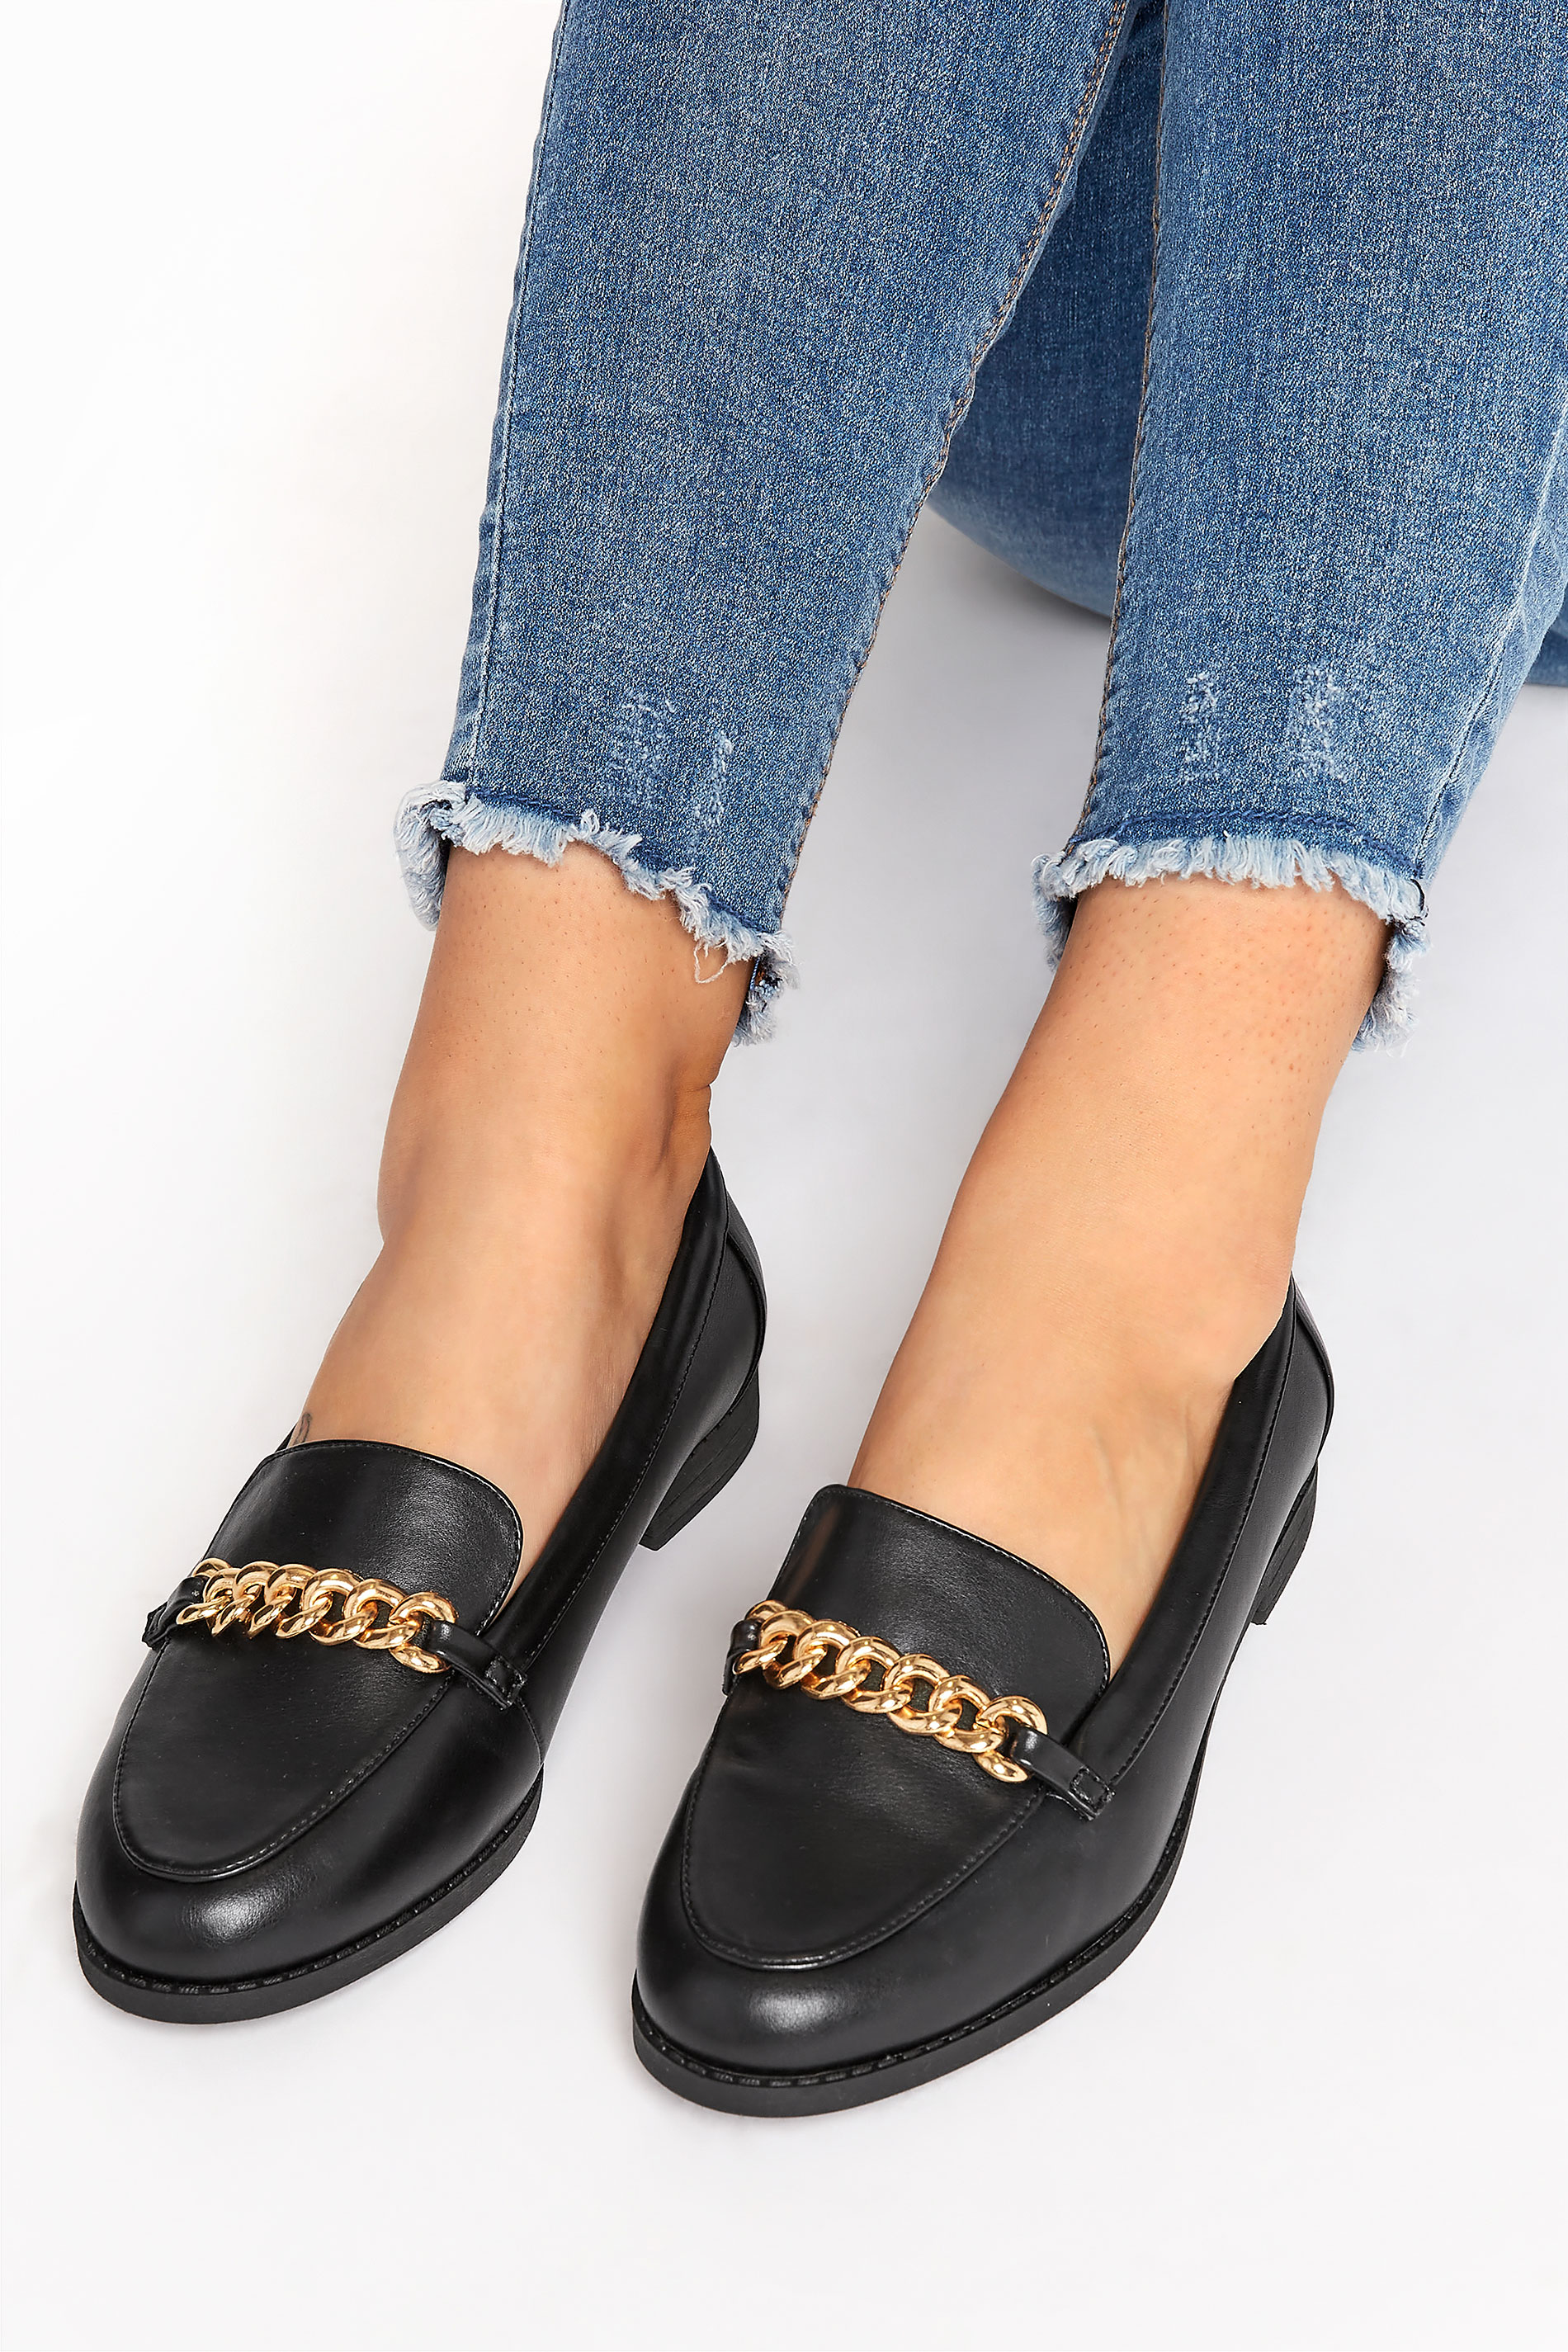 Black Chain Loafers In Extra Wide Fit | Yours Clothing 1